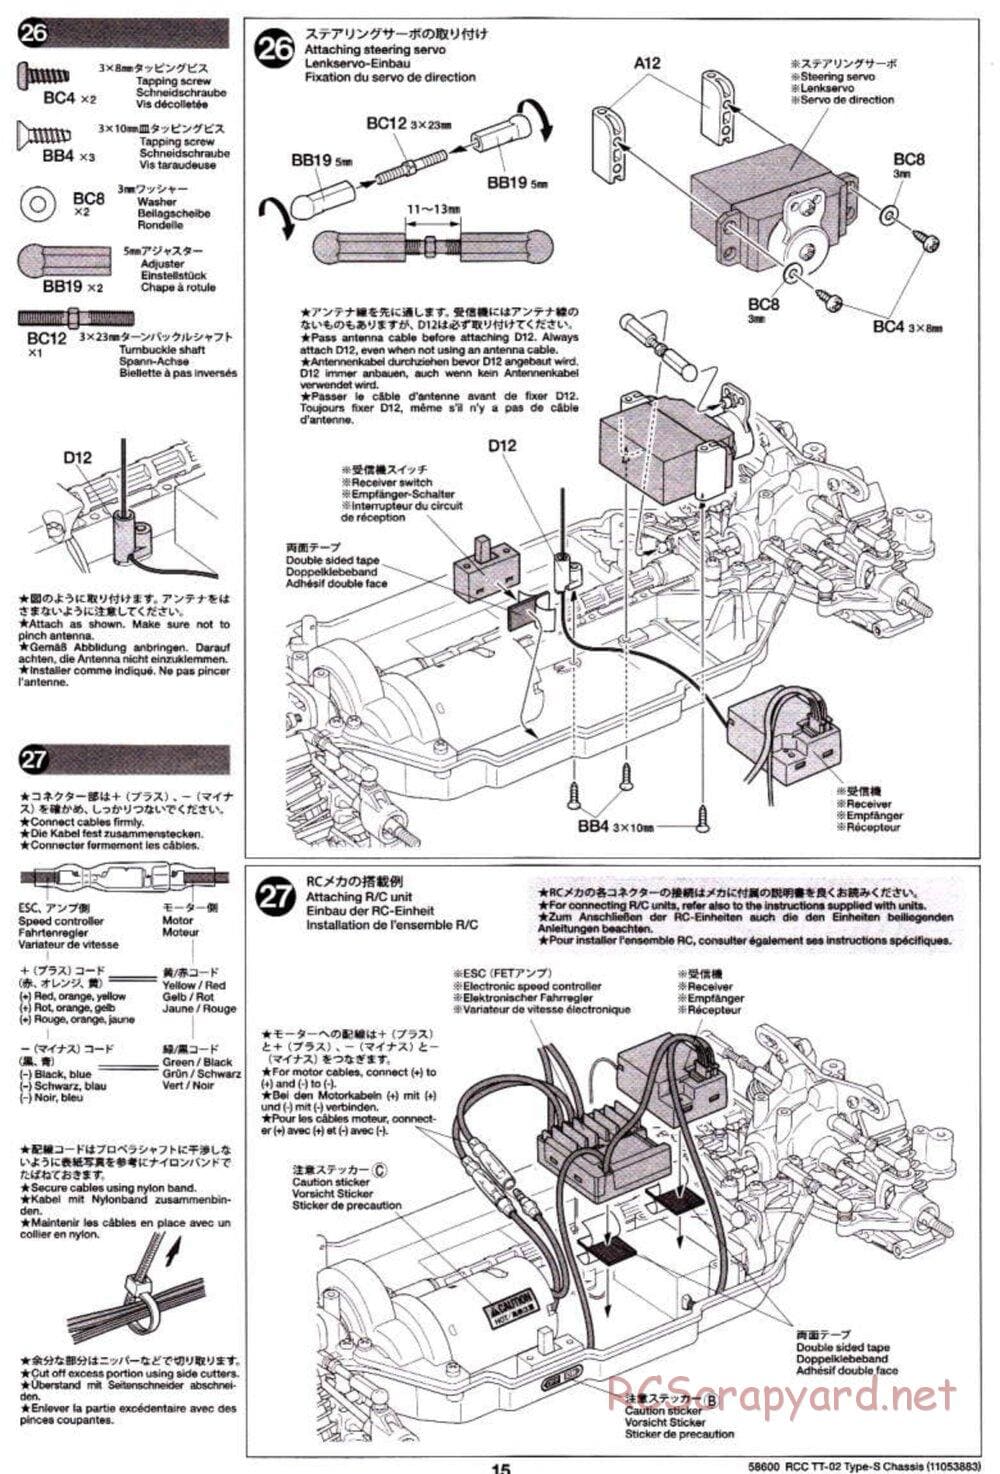 Tamiya - TT-02 Type-S Chassis - Manual - Page 15